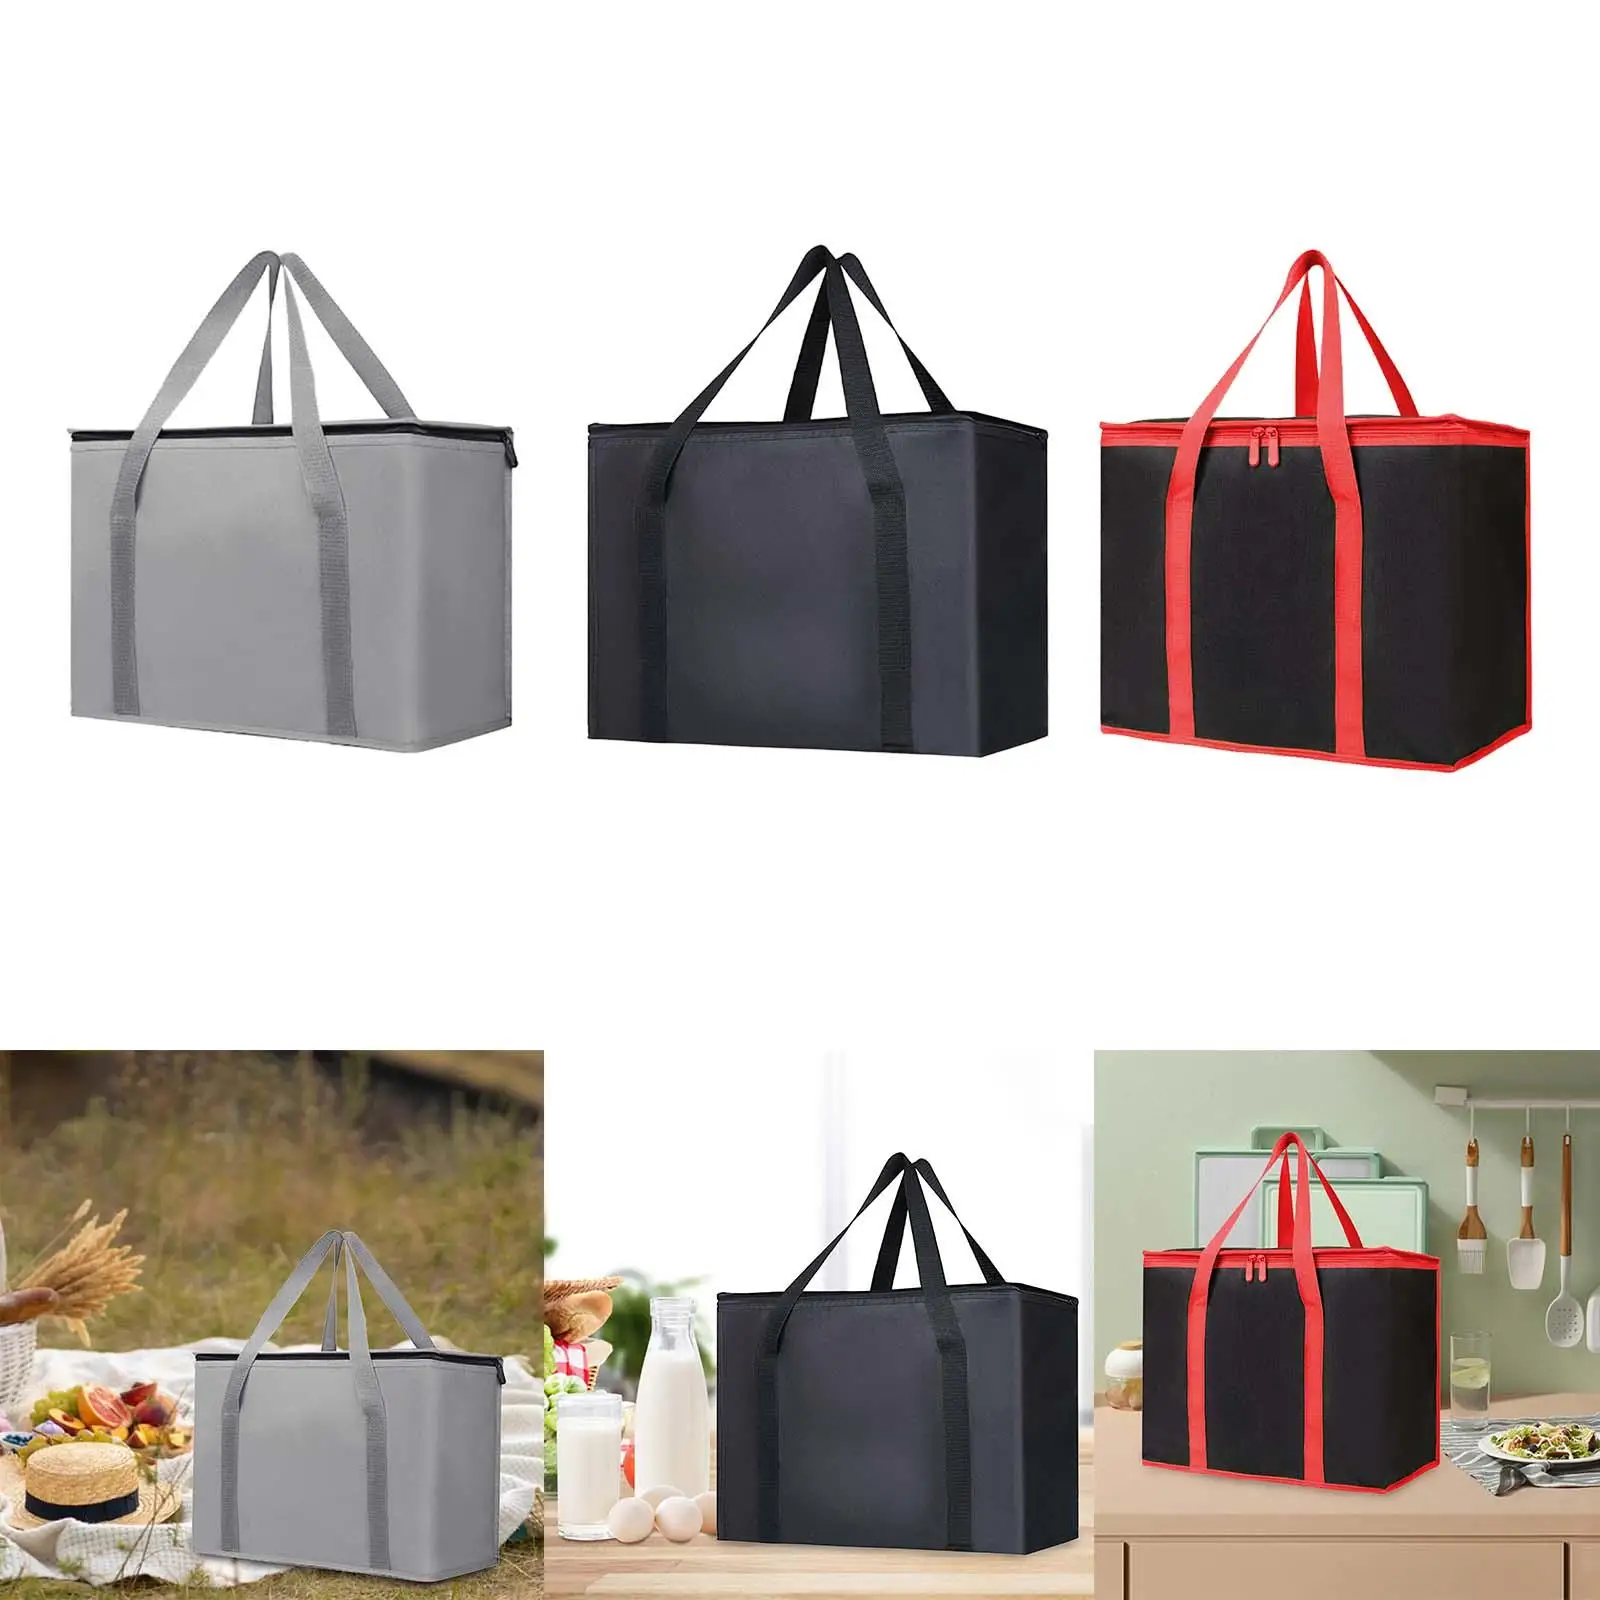 Insulated Cooler Bag Zipper Non Woven Thermal Food Delivery Bag Grocery Shopping Bag for Beach Camping Travel Outdoor Picnic